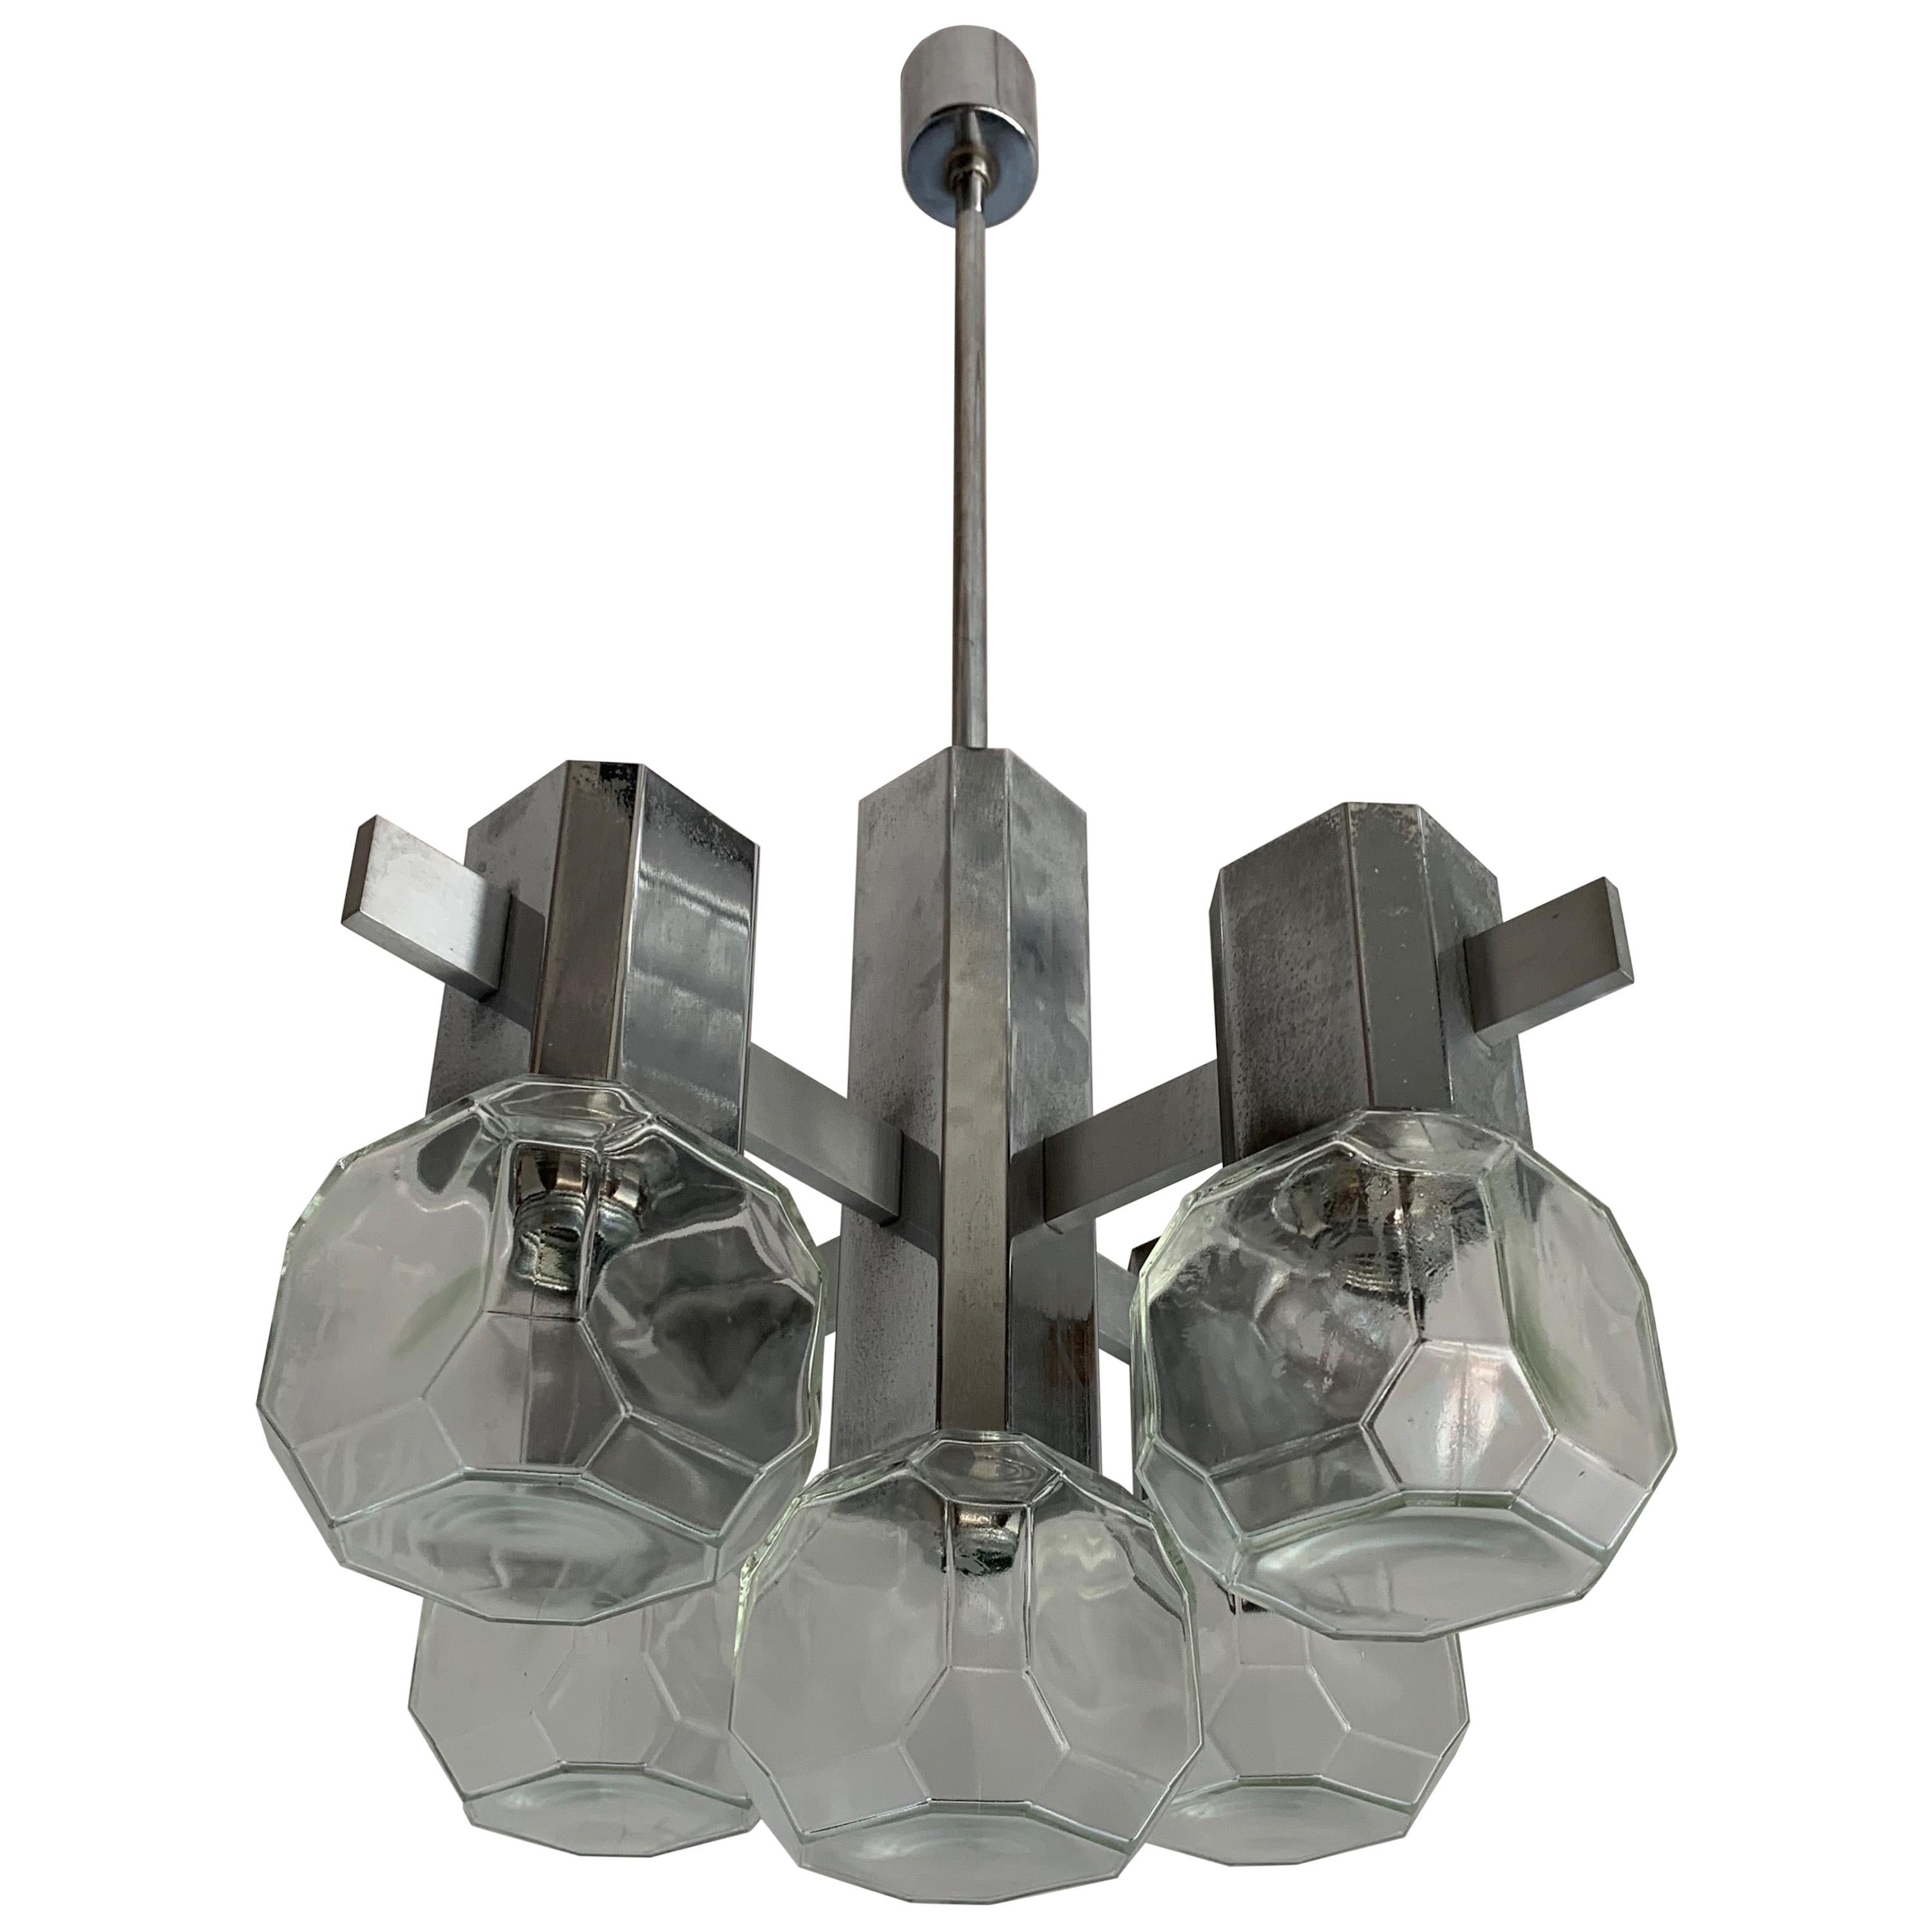 Mid-Century Modern Chrome Metal Pendant Light with Cubical Design Glass Shades